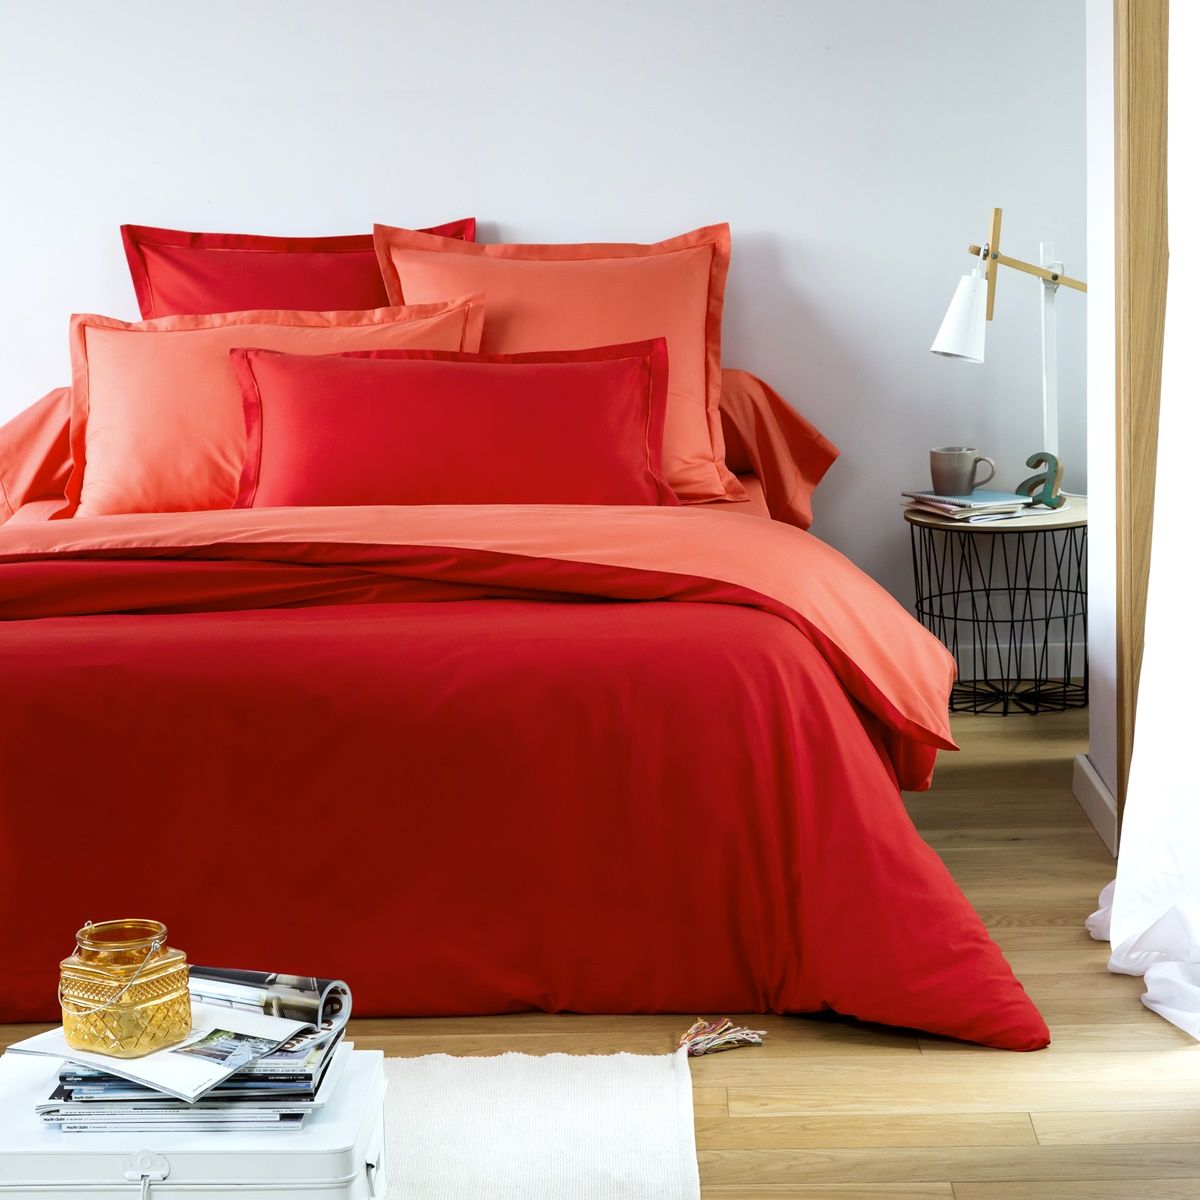 A bed made up in red tones